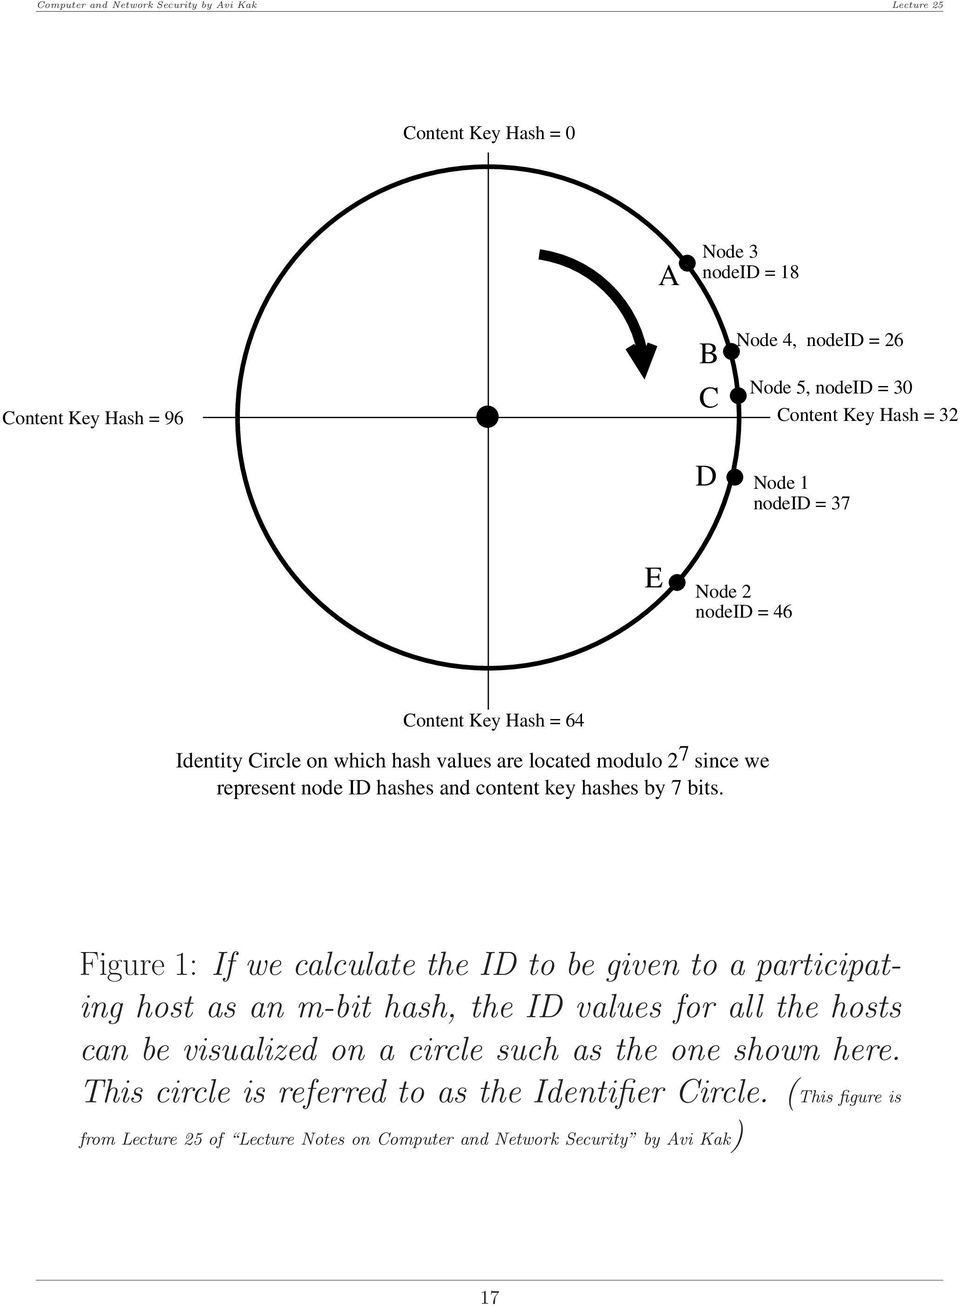 Figure 1: If we calculate the ID to be given to a participating host as an m-bit hash, the ID values for all the hosts can be visualized on a circle such as the